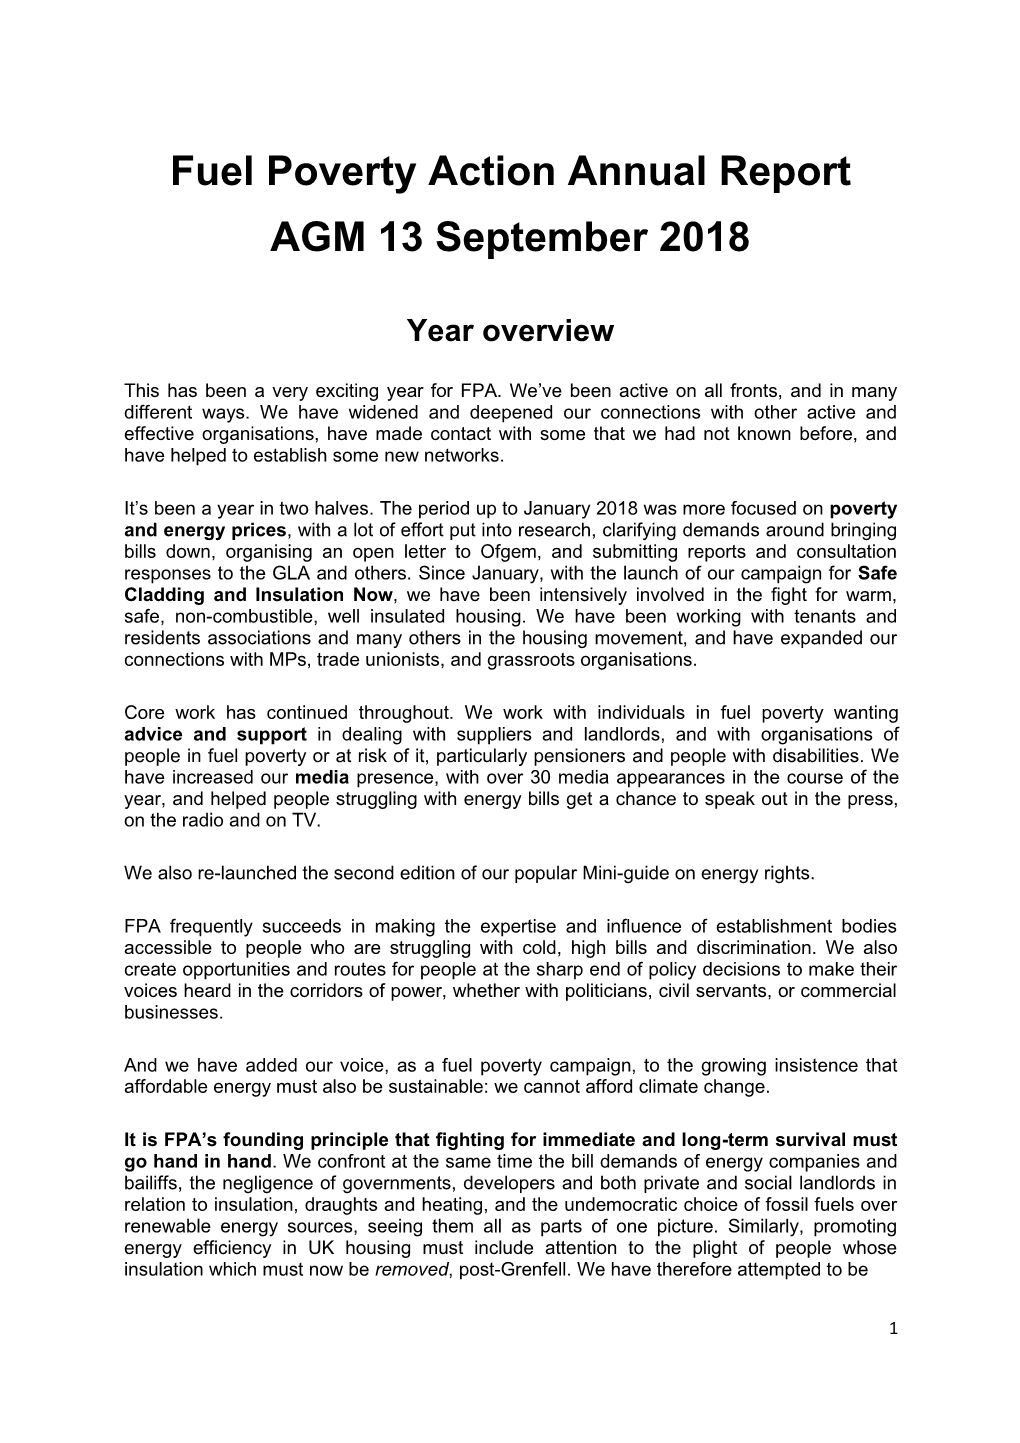 Fuel Poverty Action Annual Report AGM 13 September 2018